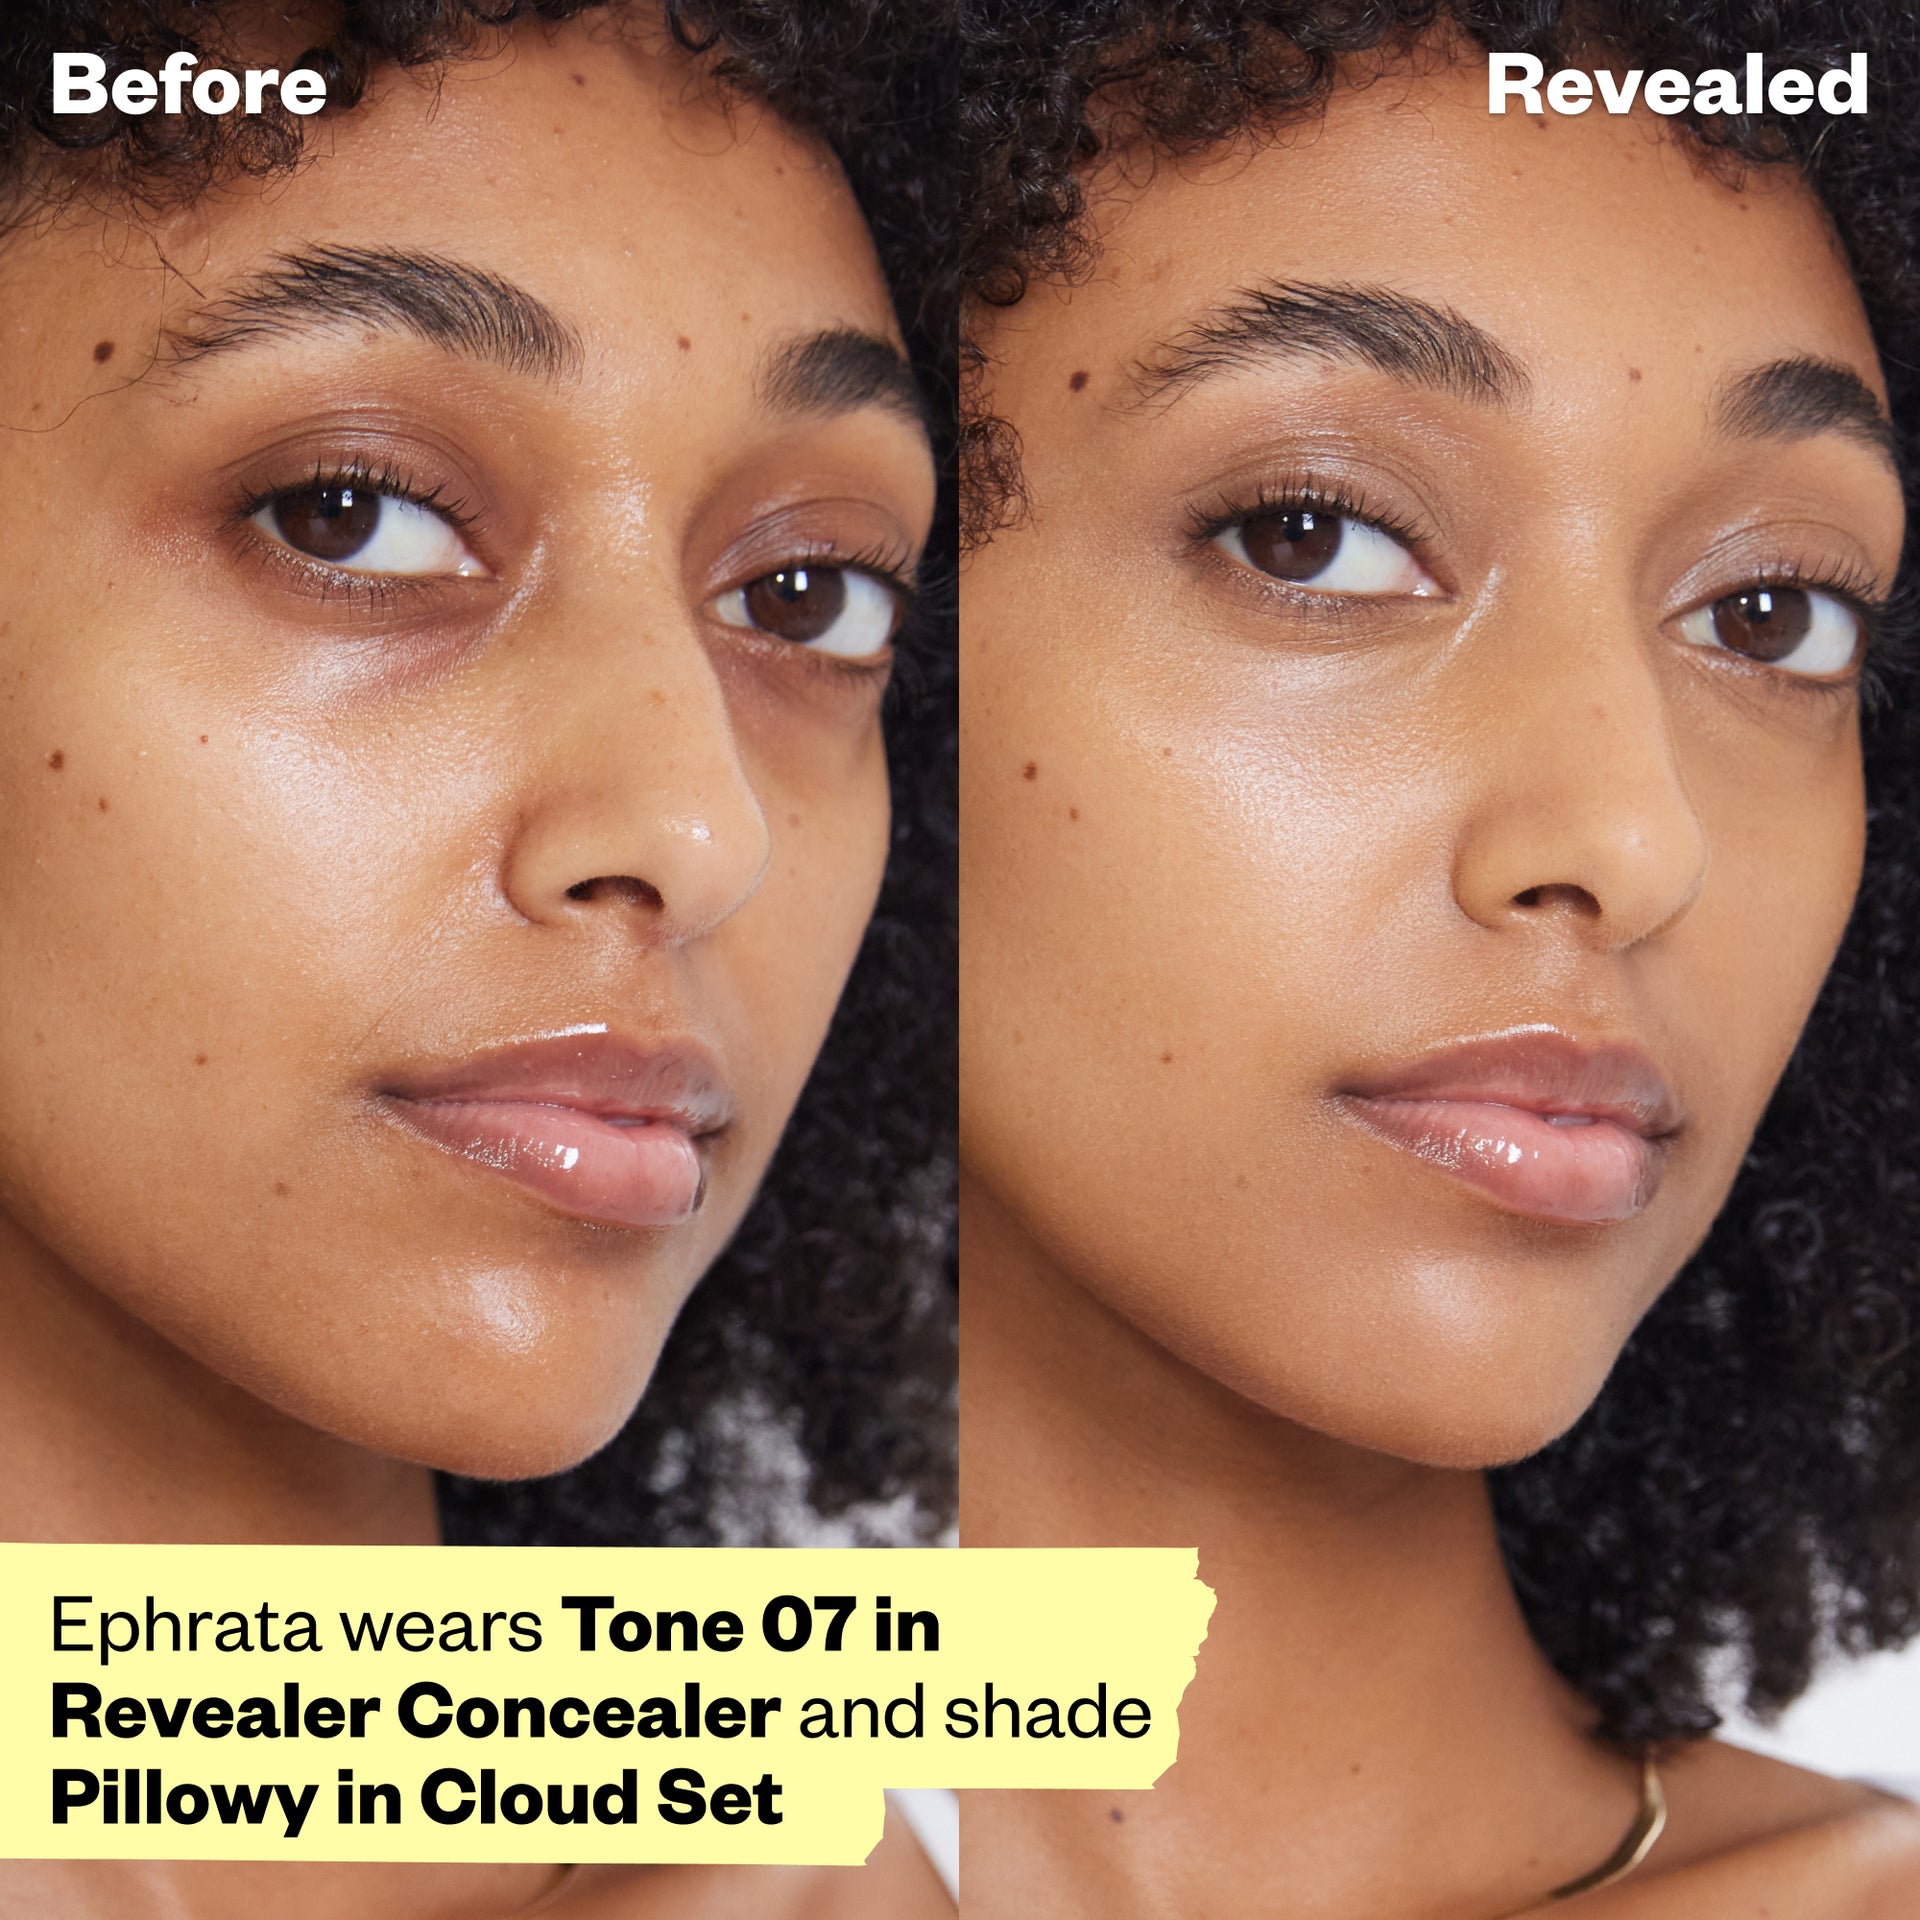 Ephrata wears Tone 07 in Revealer Concealer and shade Pillowy in Cloud Set